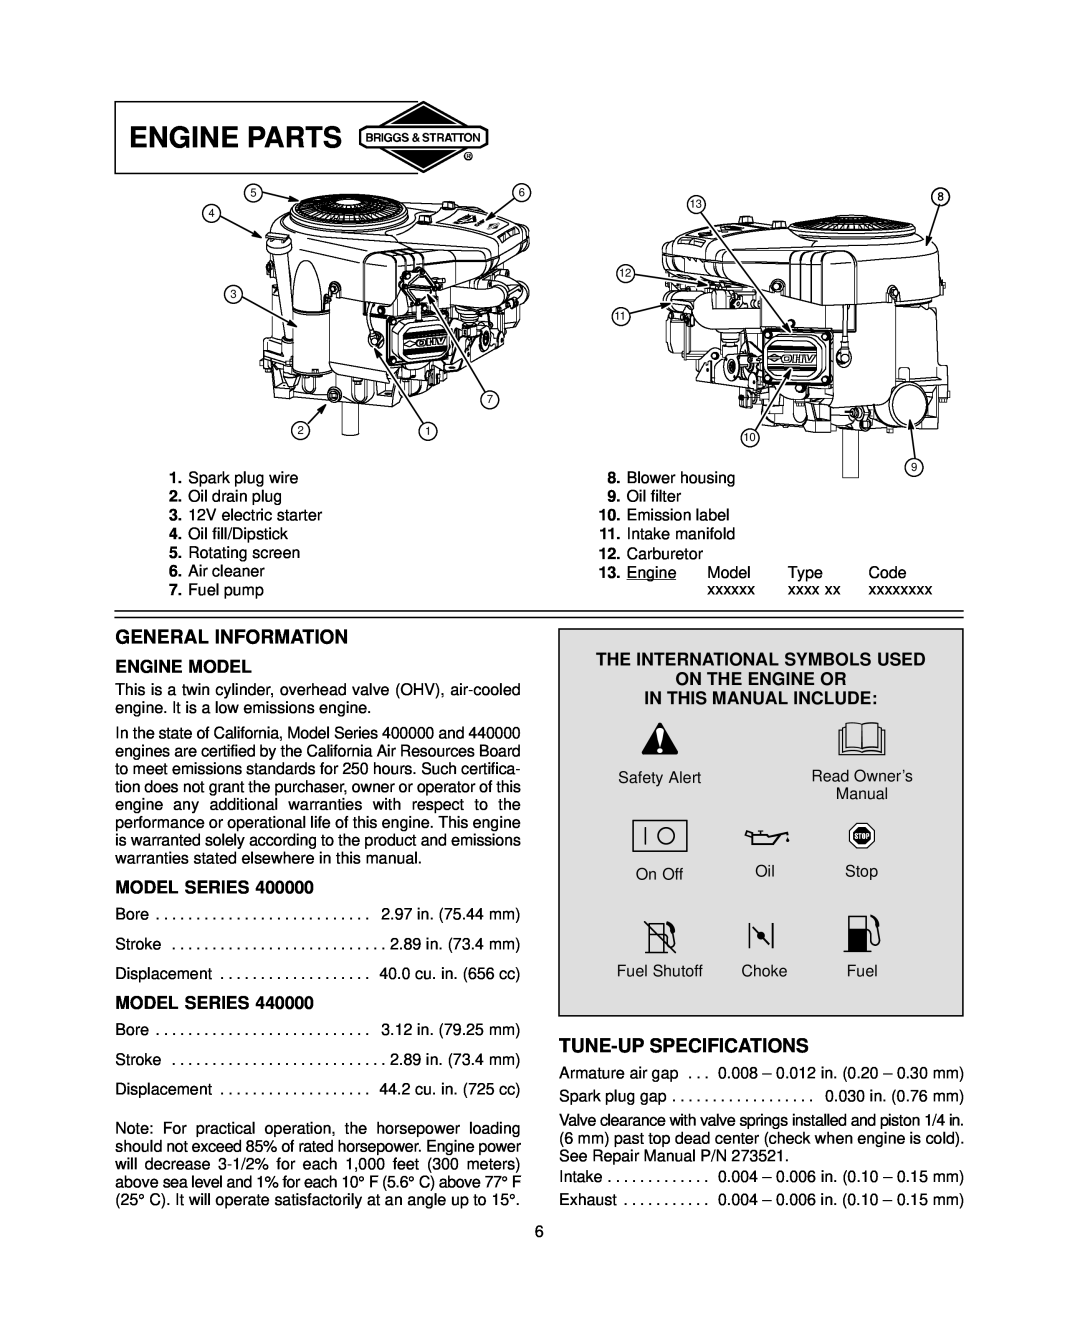 Briggs & Stratton 445700, 407700 Engine Parts, General Information, Tune-Upspecifications, Engine Model, Model Series 